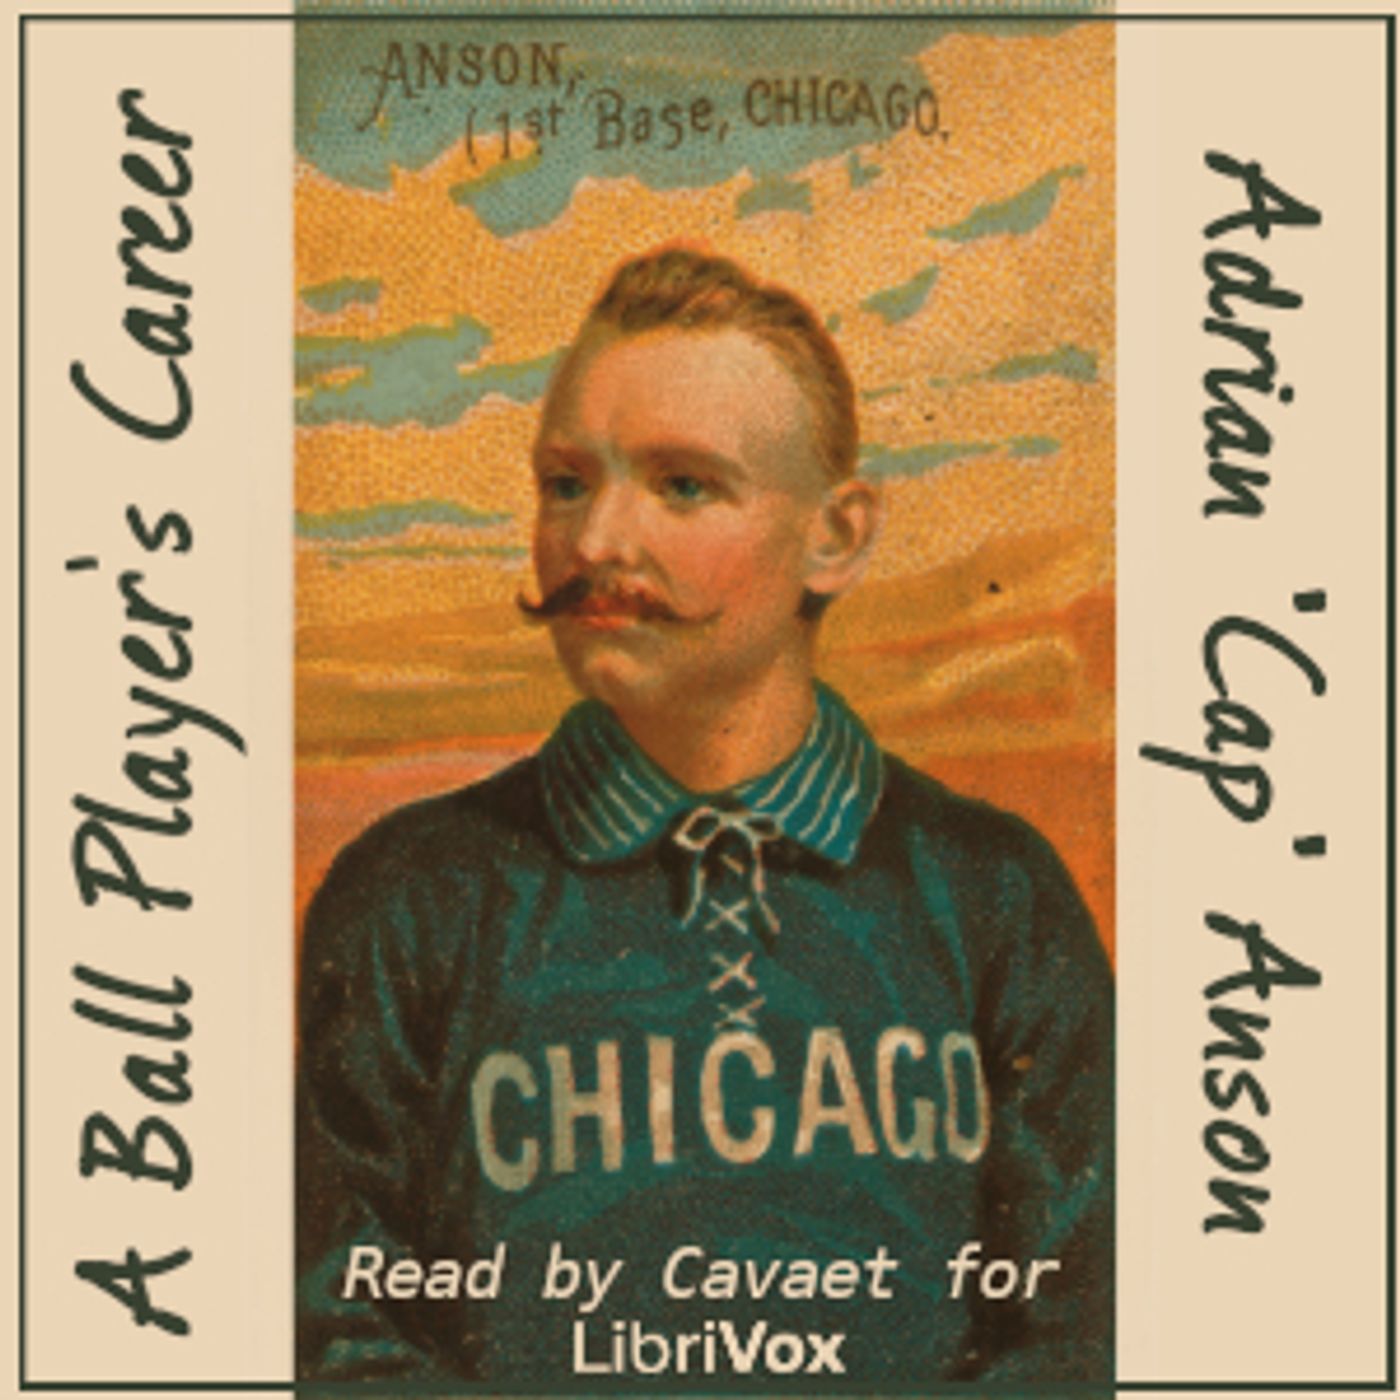 Ball Player’s Career, A by Adrian C. Anson (1852 – 1922)